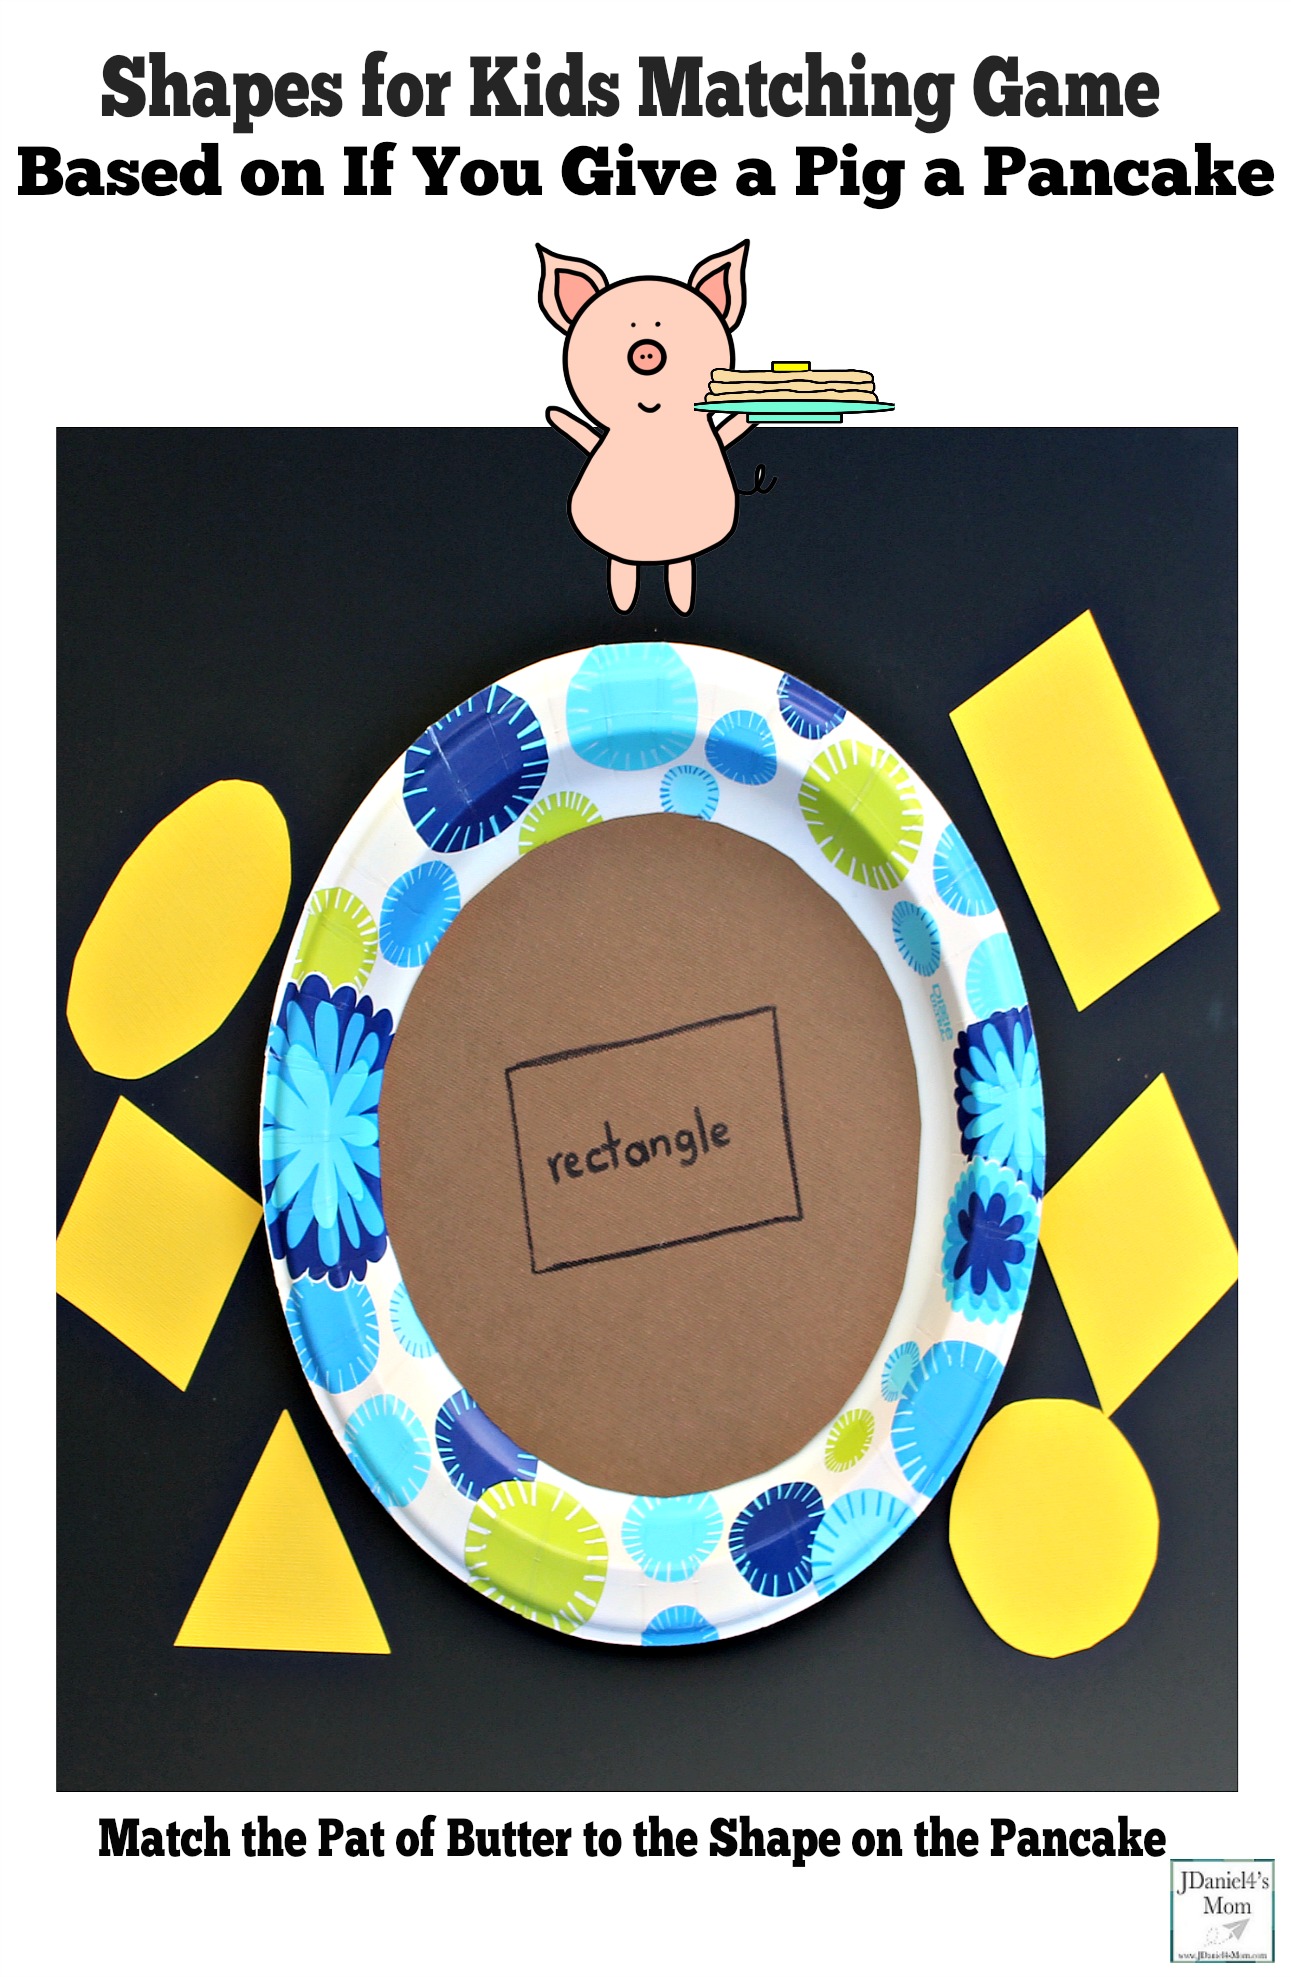 Shapes for Kids Matching Game Based on If You Give Pig a Pancake - Children at home and students at school will have fun matching the shapes on pancakes with the shapes on yellow paper butter pats. This is a fun way to identify shapes.